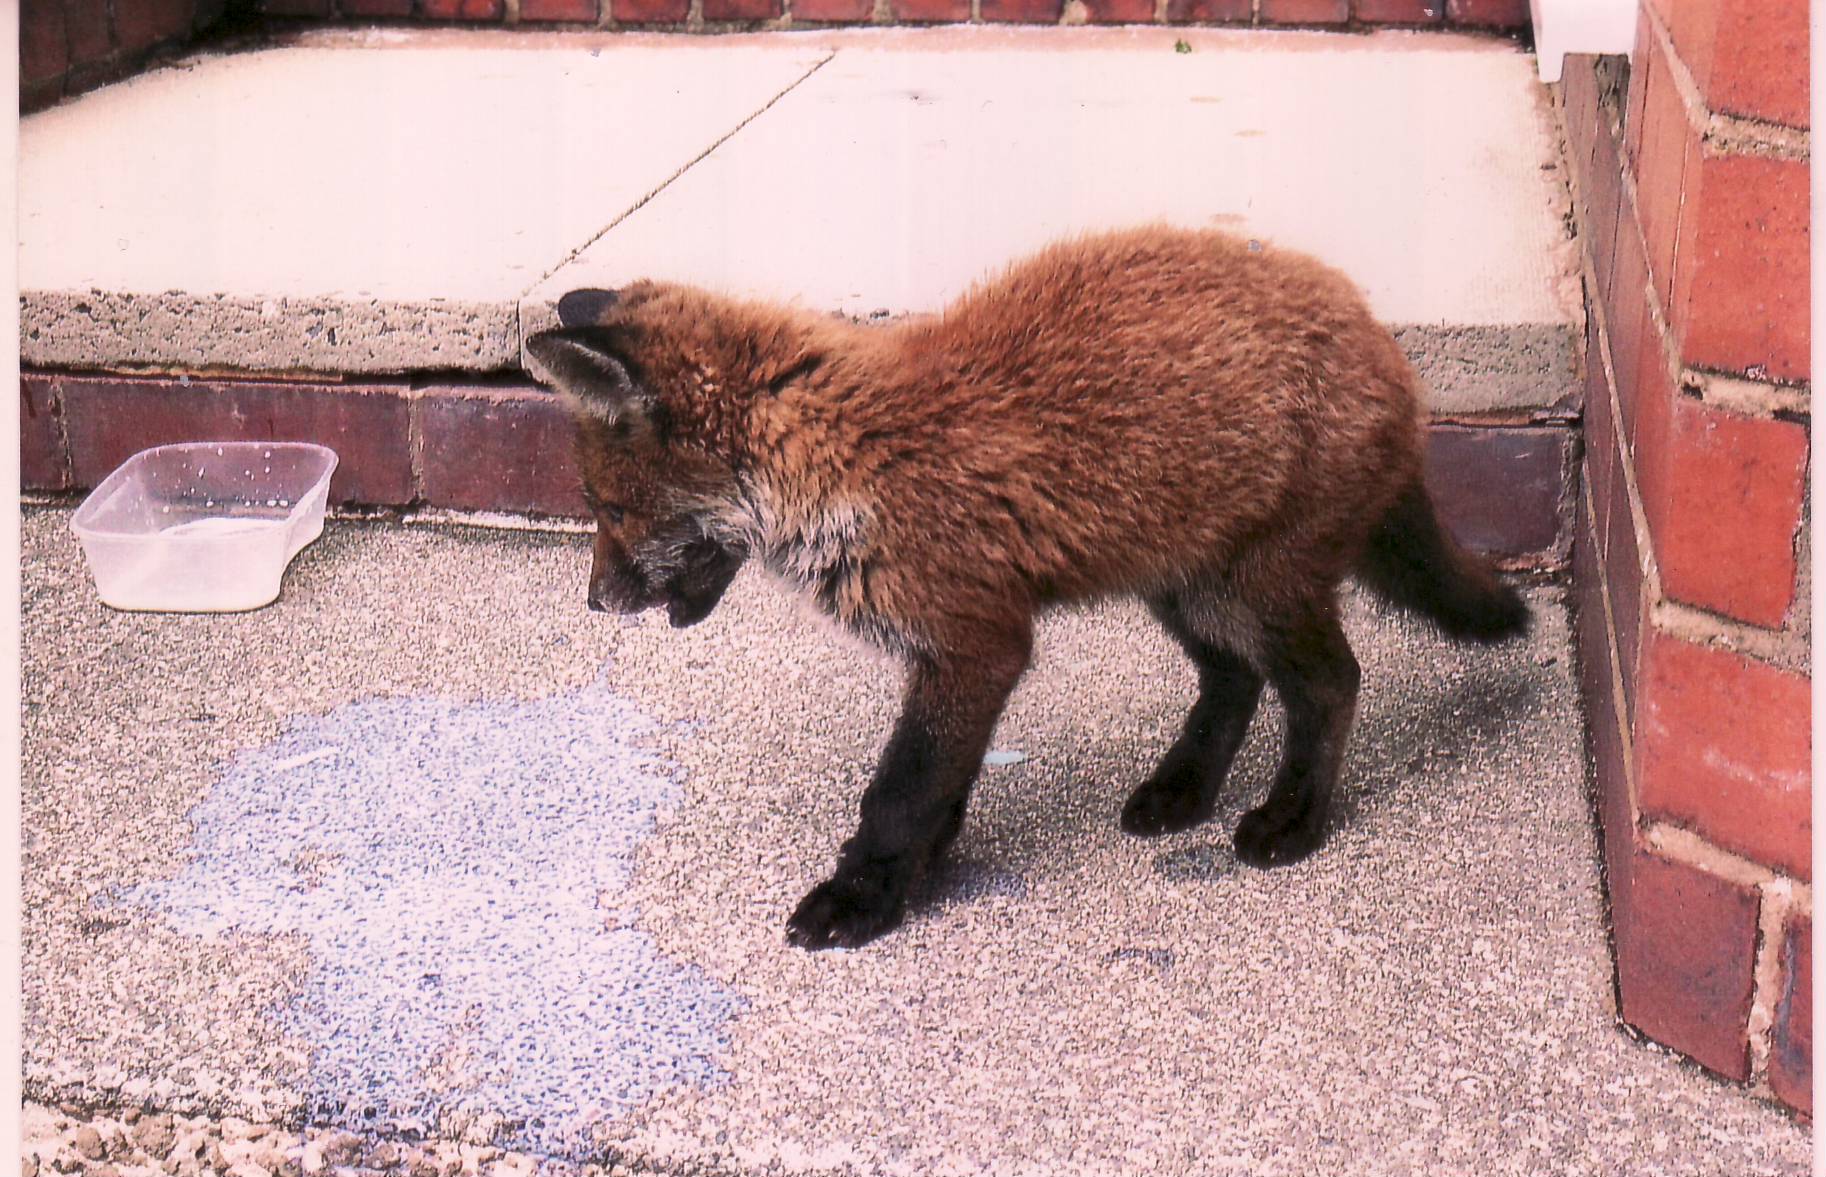 Teenager finds fox cub wandering alone in Harwood